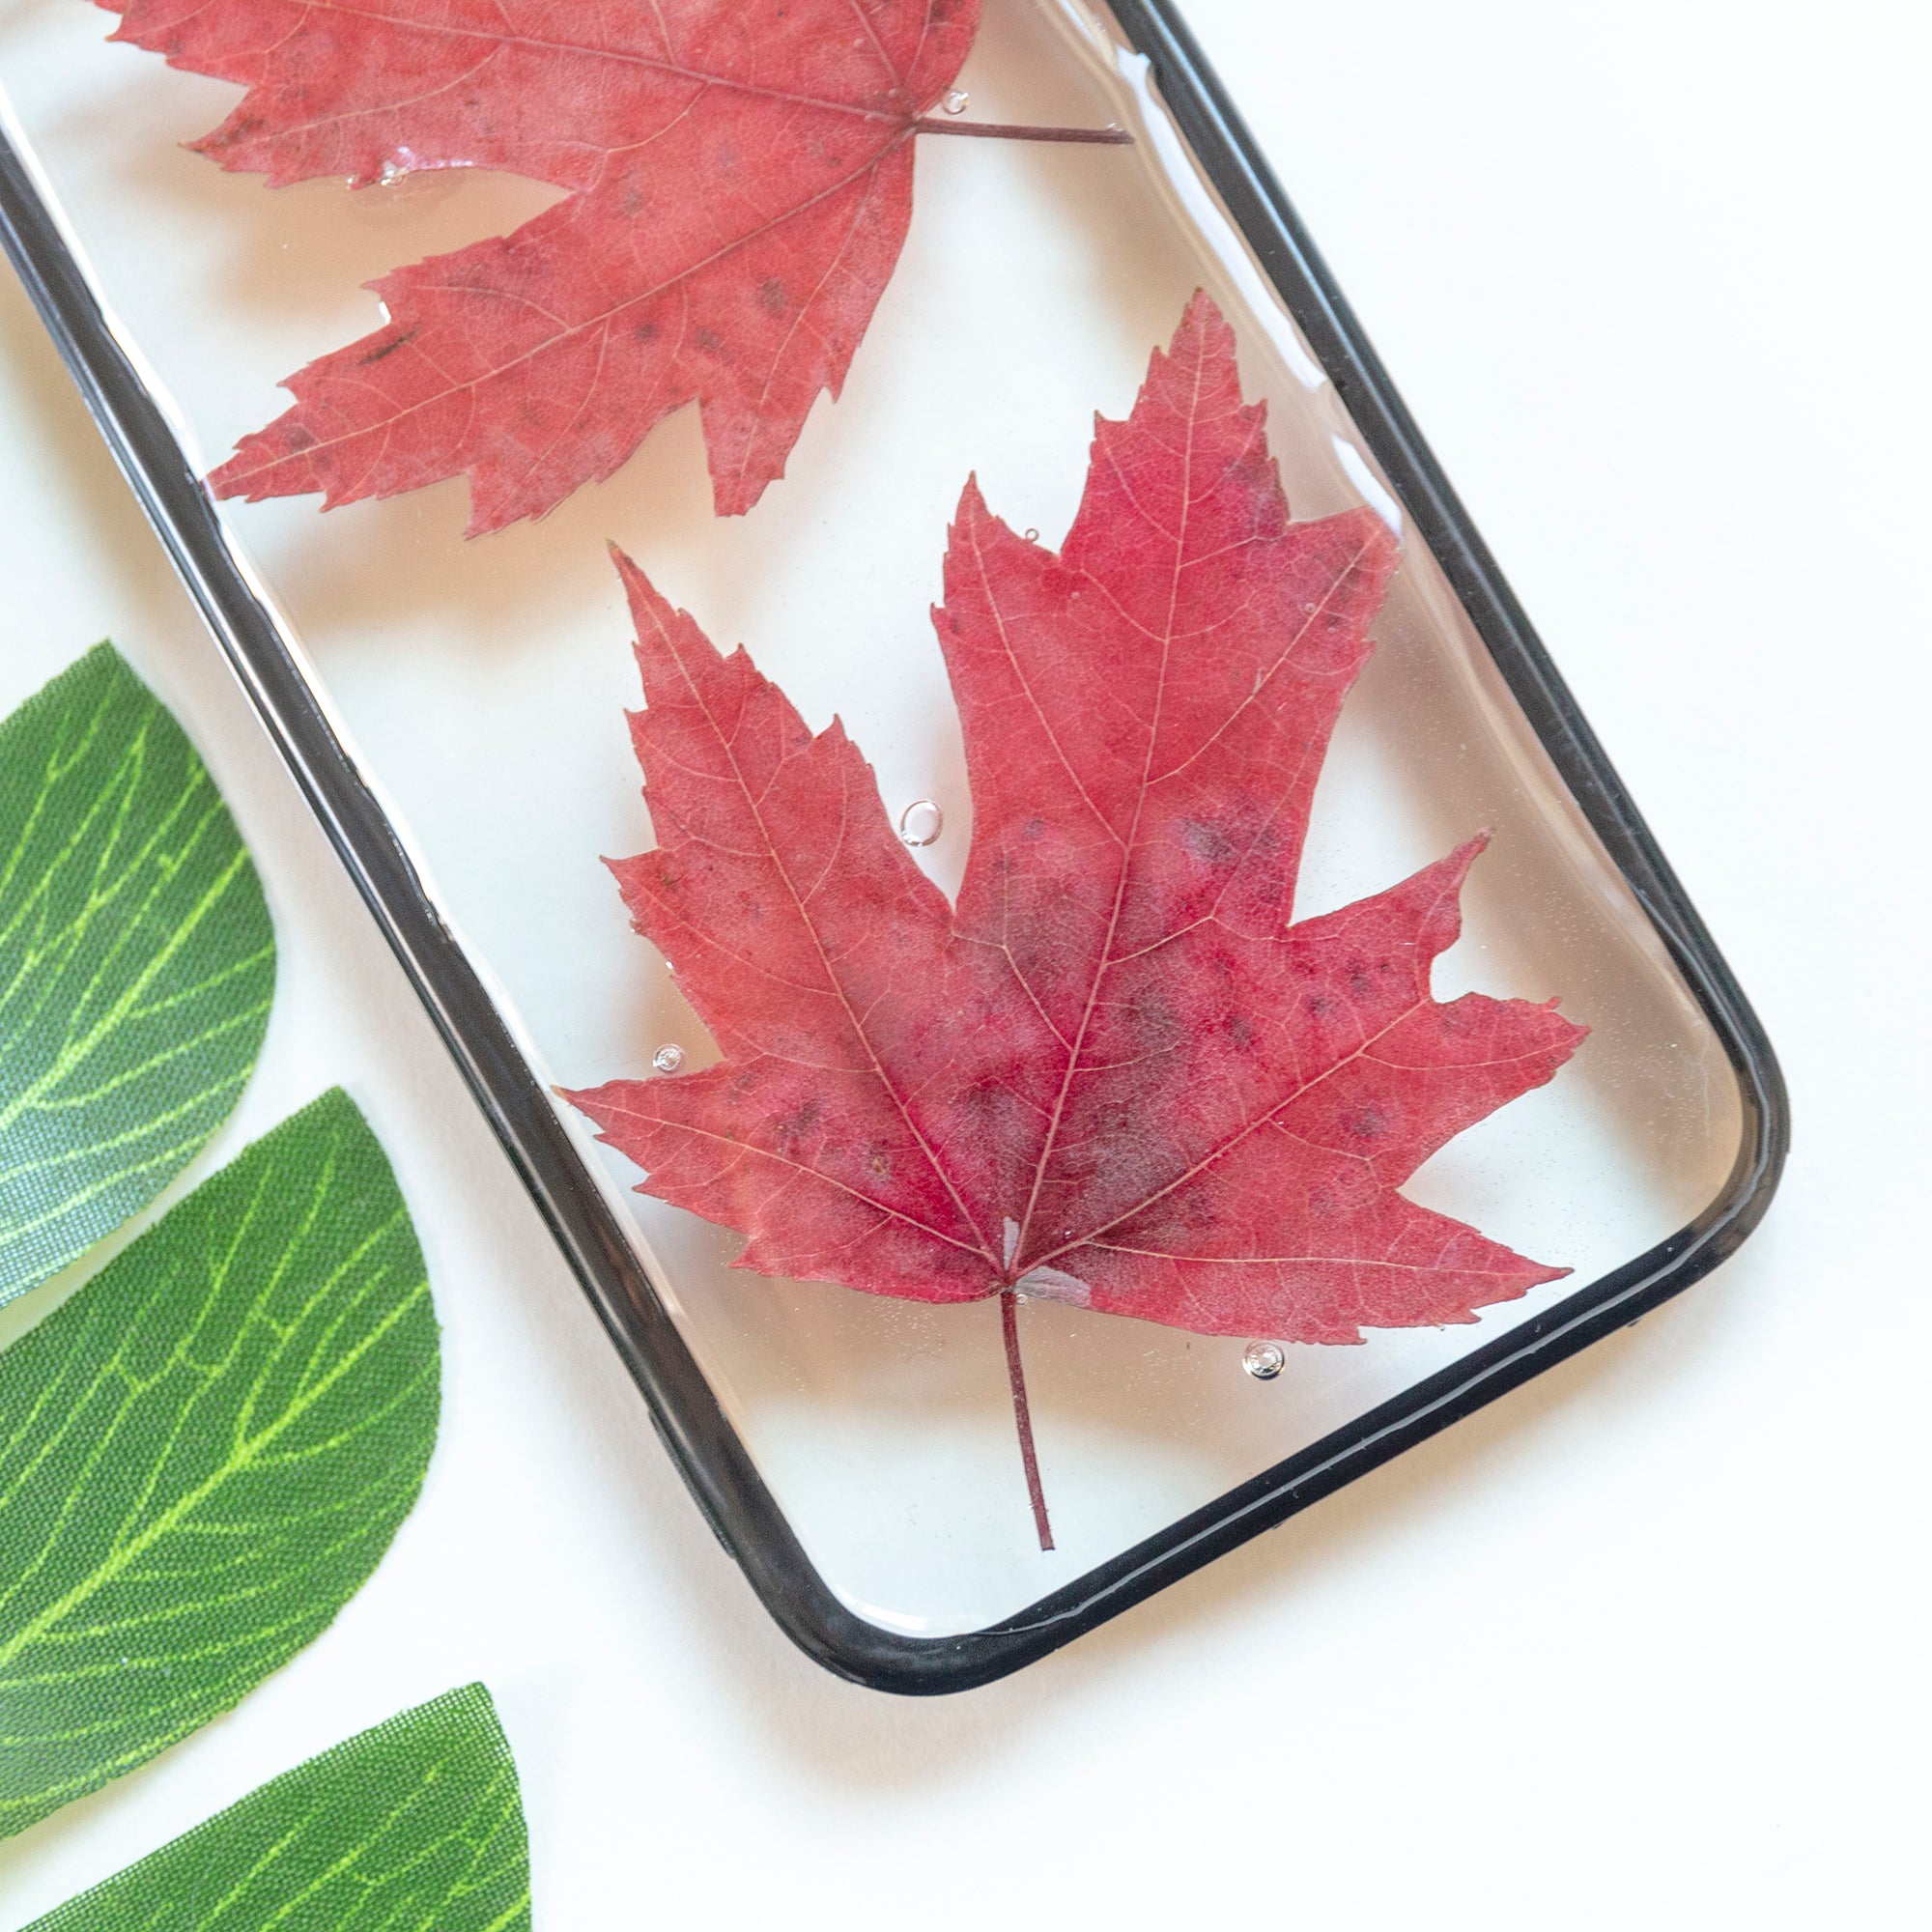 Floral Neverland Floralfy Fall Leaves Real Pressed Red Canadian Maple Leaf Flower Floral Foliage Botanical iPhone 5 5S SE Bumper Case 03